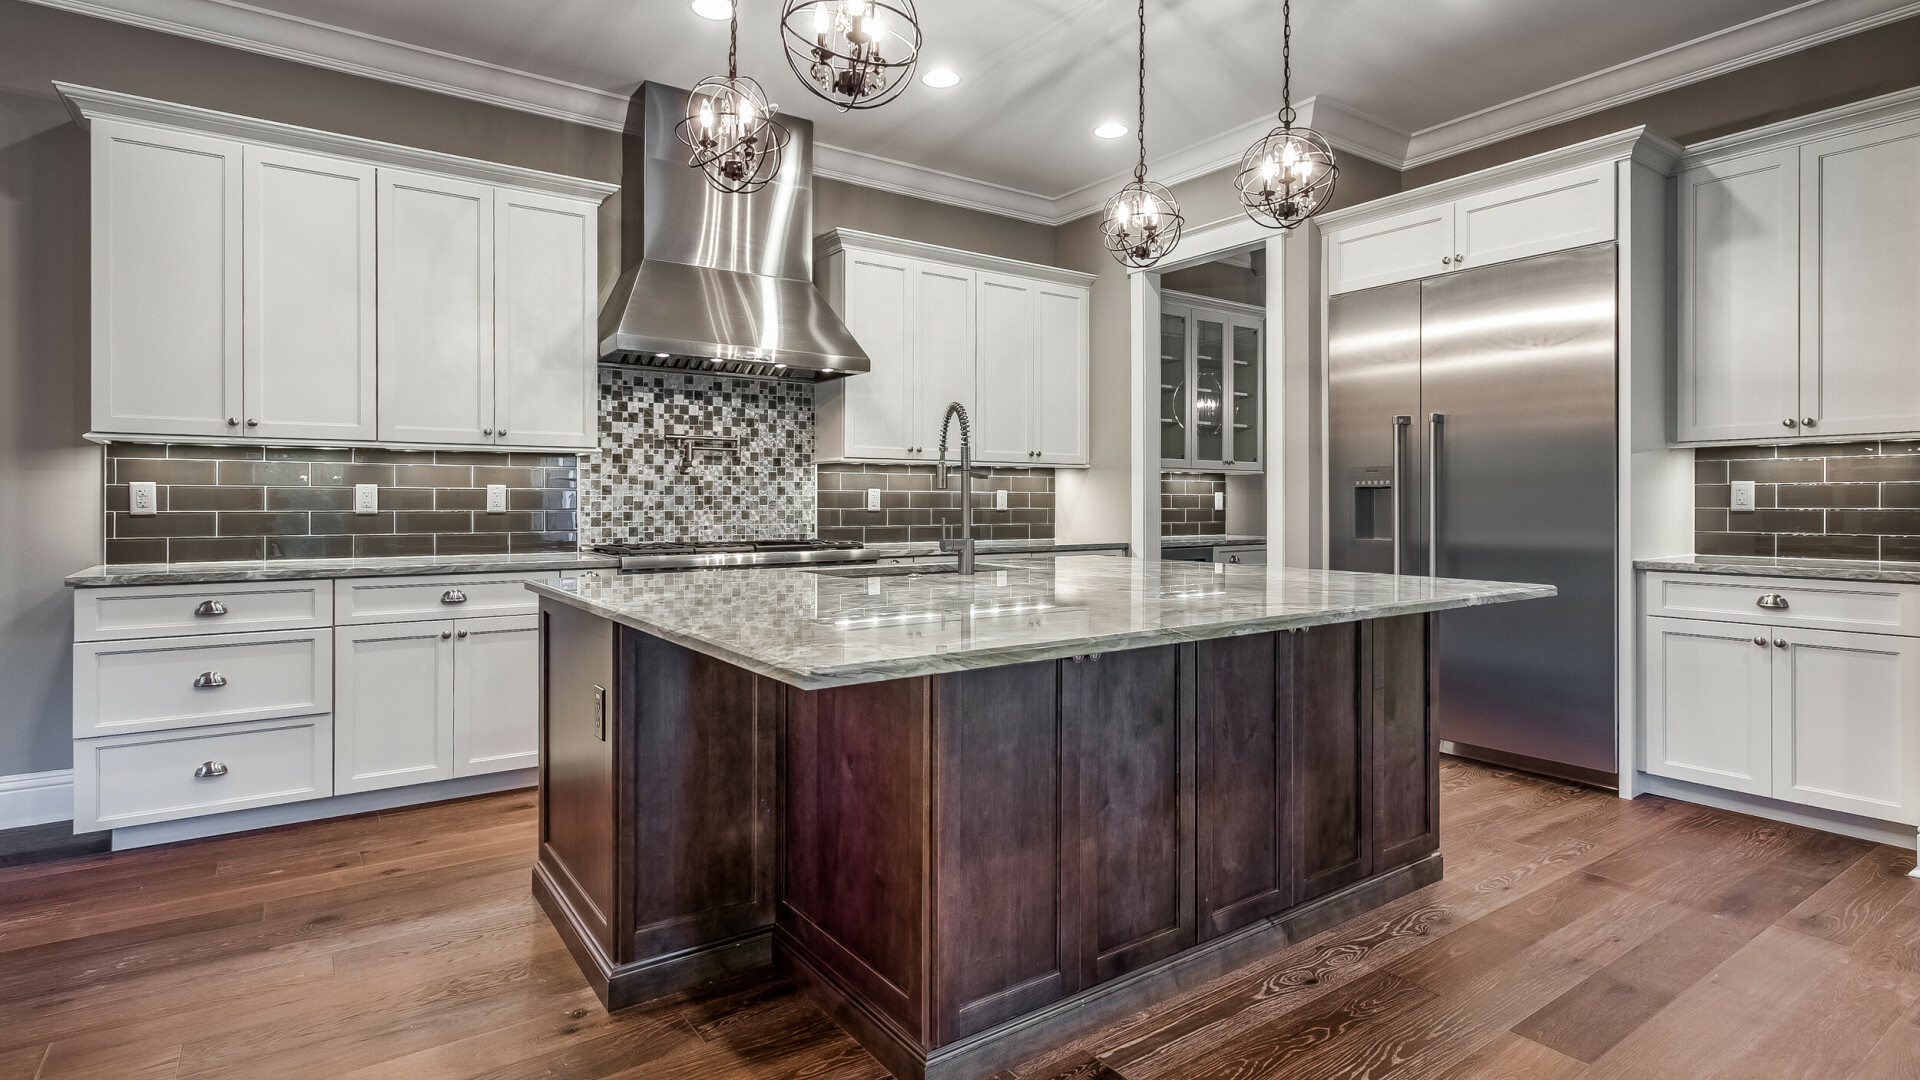 Luxury kitchen boasting a custom island and tile throughout, St. Petersburg FL